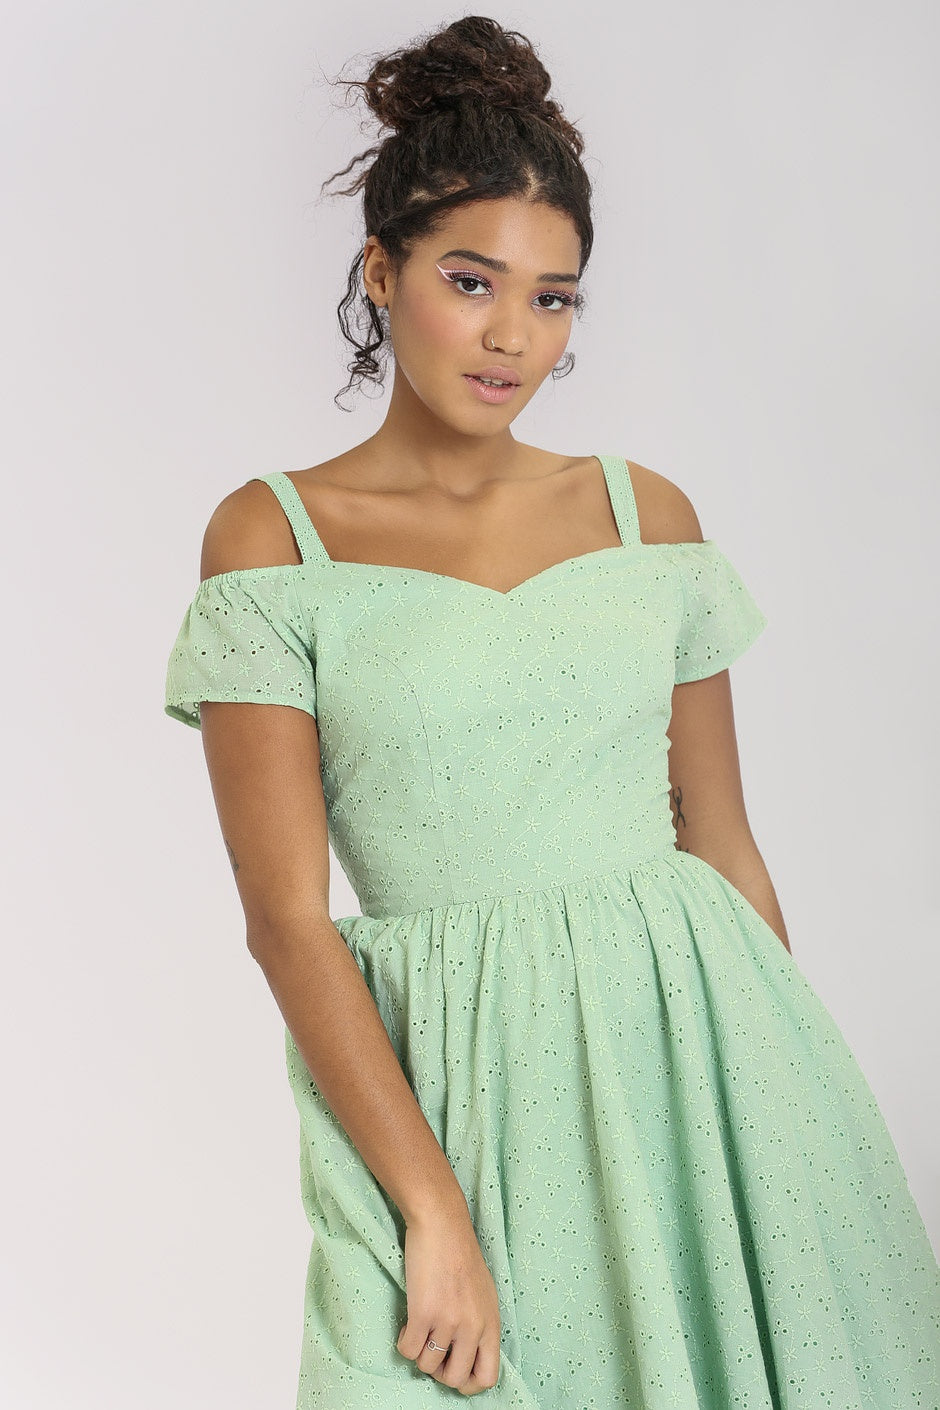 Celia Mint Anglaise Cotton 50s Inspired Gathered Swing Dress